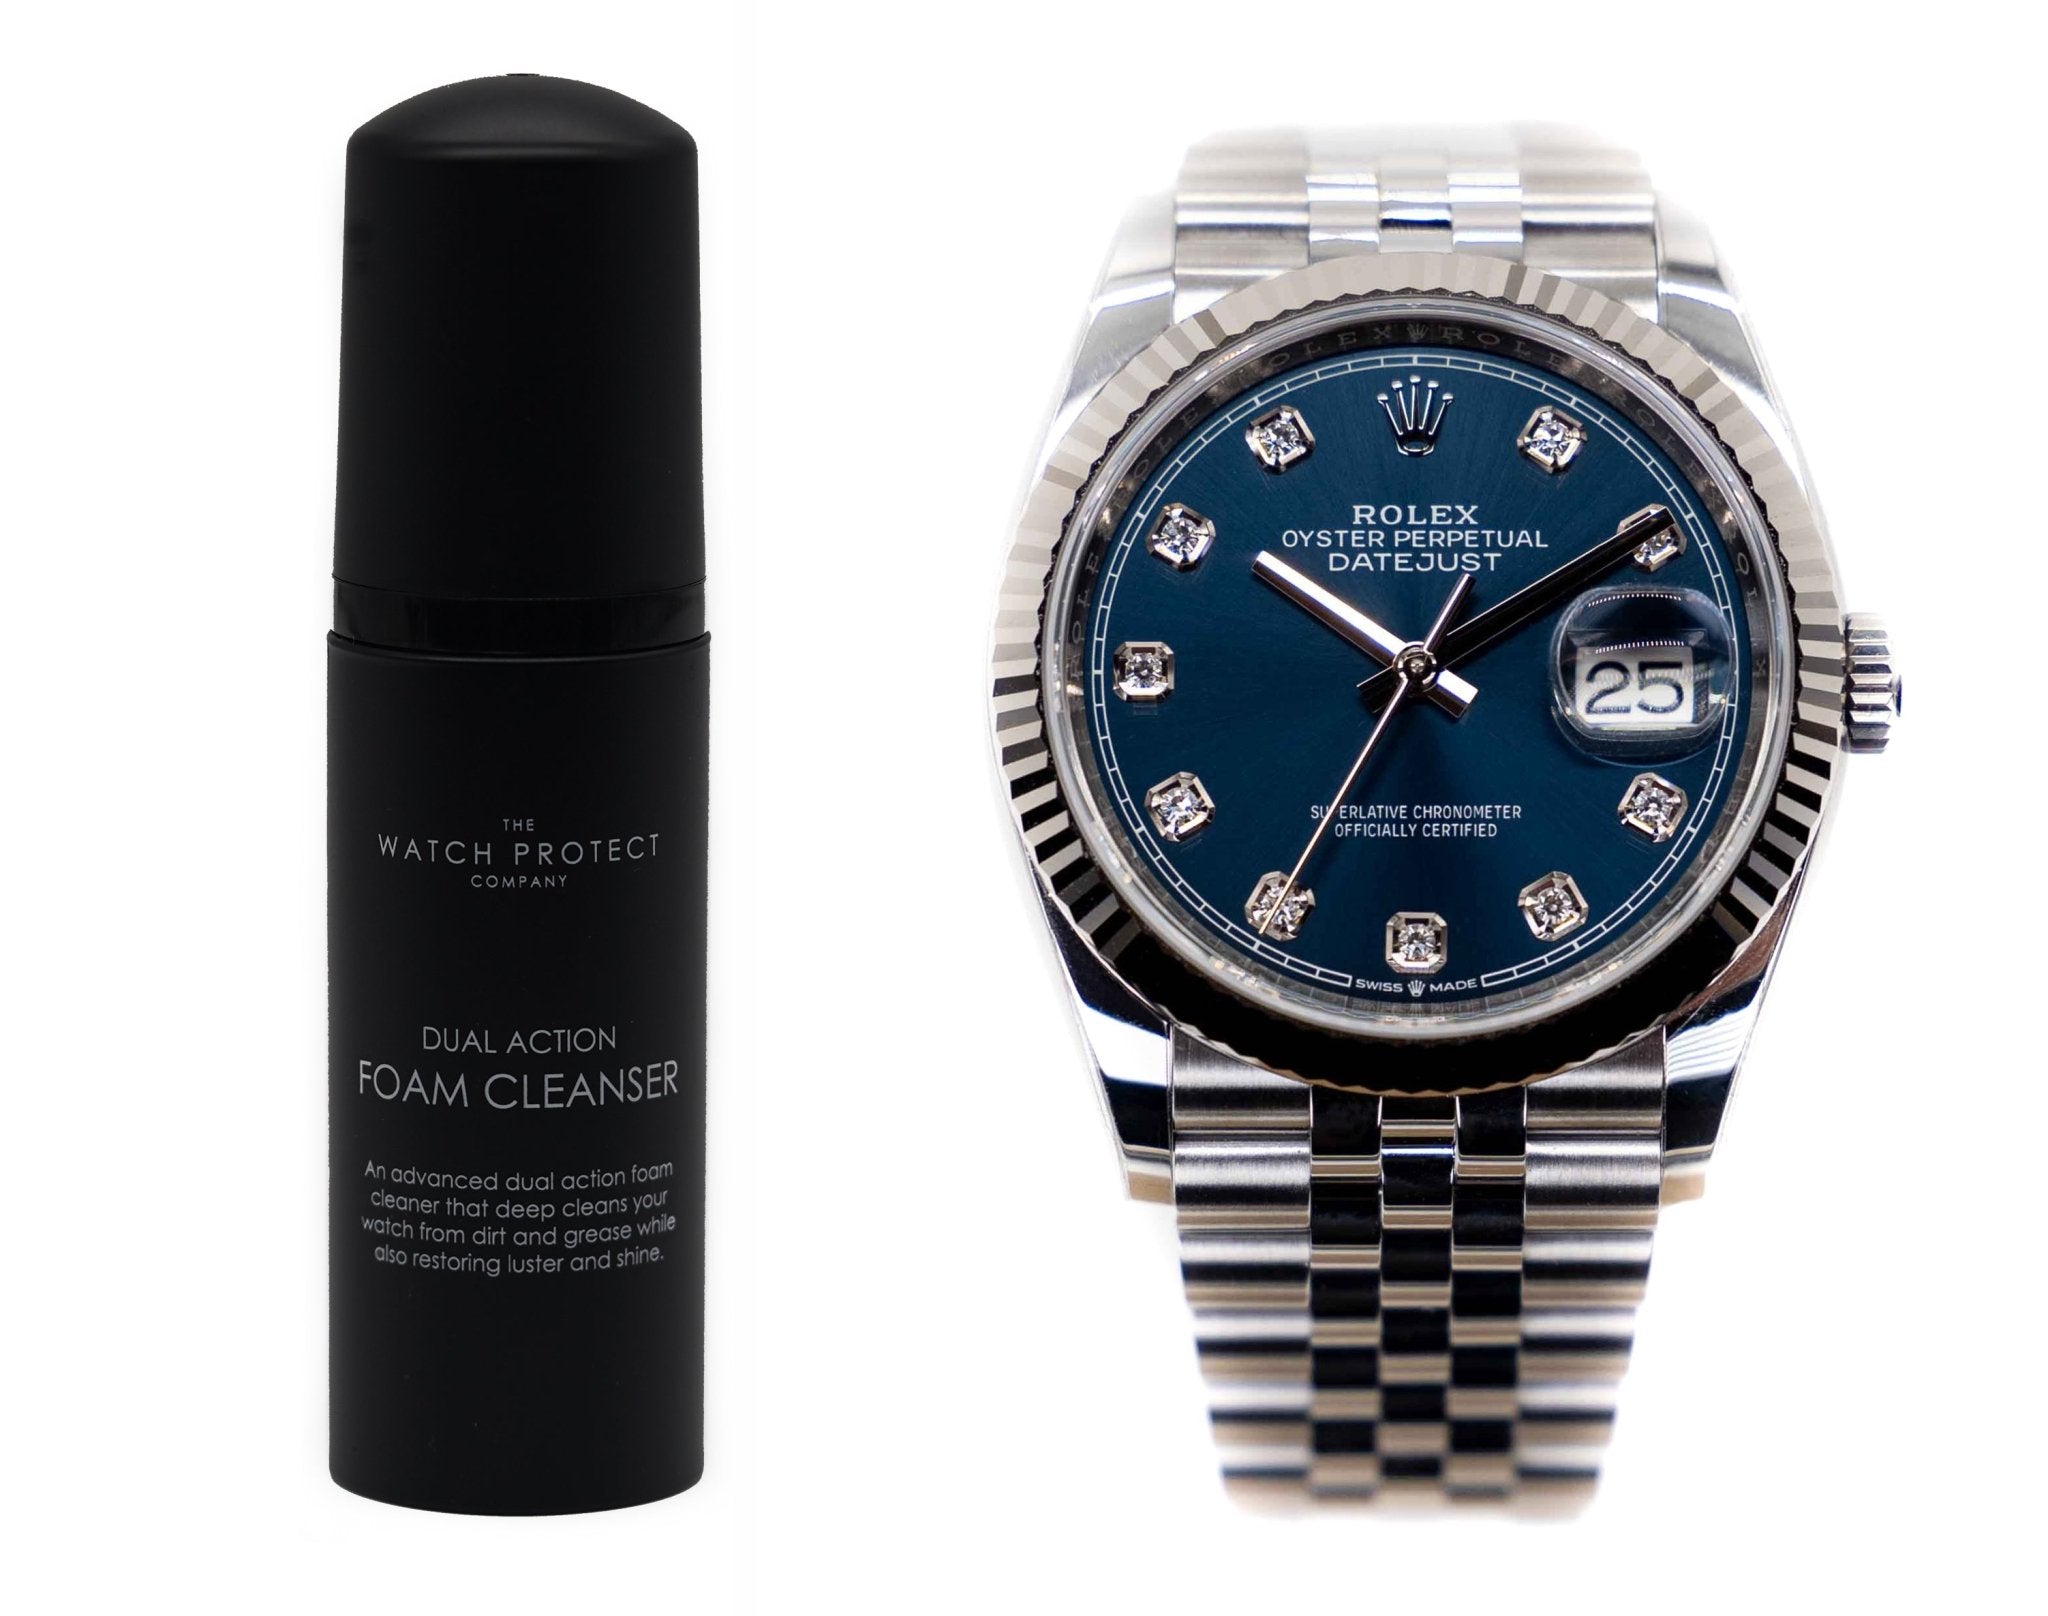 DUAL ACTION FOAM CLEANER & ROLEX DATEJUST 36 116200/126200 - TIER 3 - WATCH PROTECTION KIT BUNDLE - The Watch Protect Company